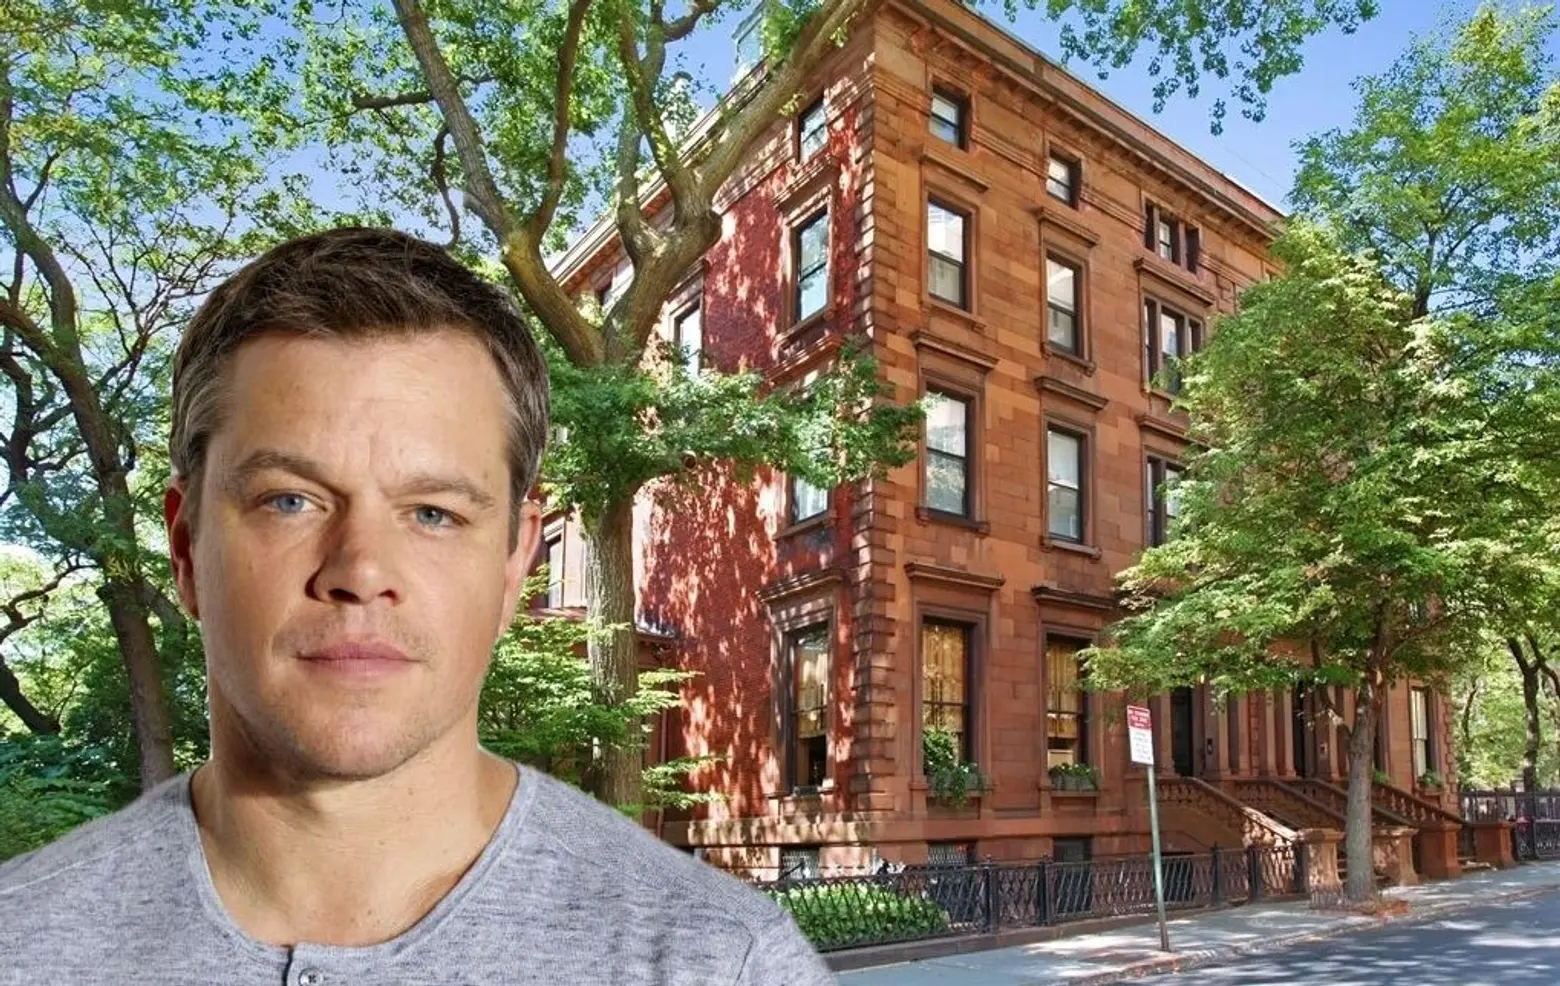 Matt Damon checks out Brooklyn’s most expensive house, a Brooklyn Heights mansion with a mayoral past